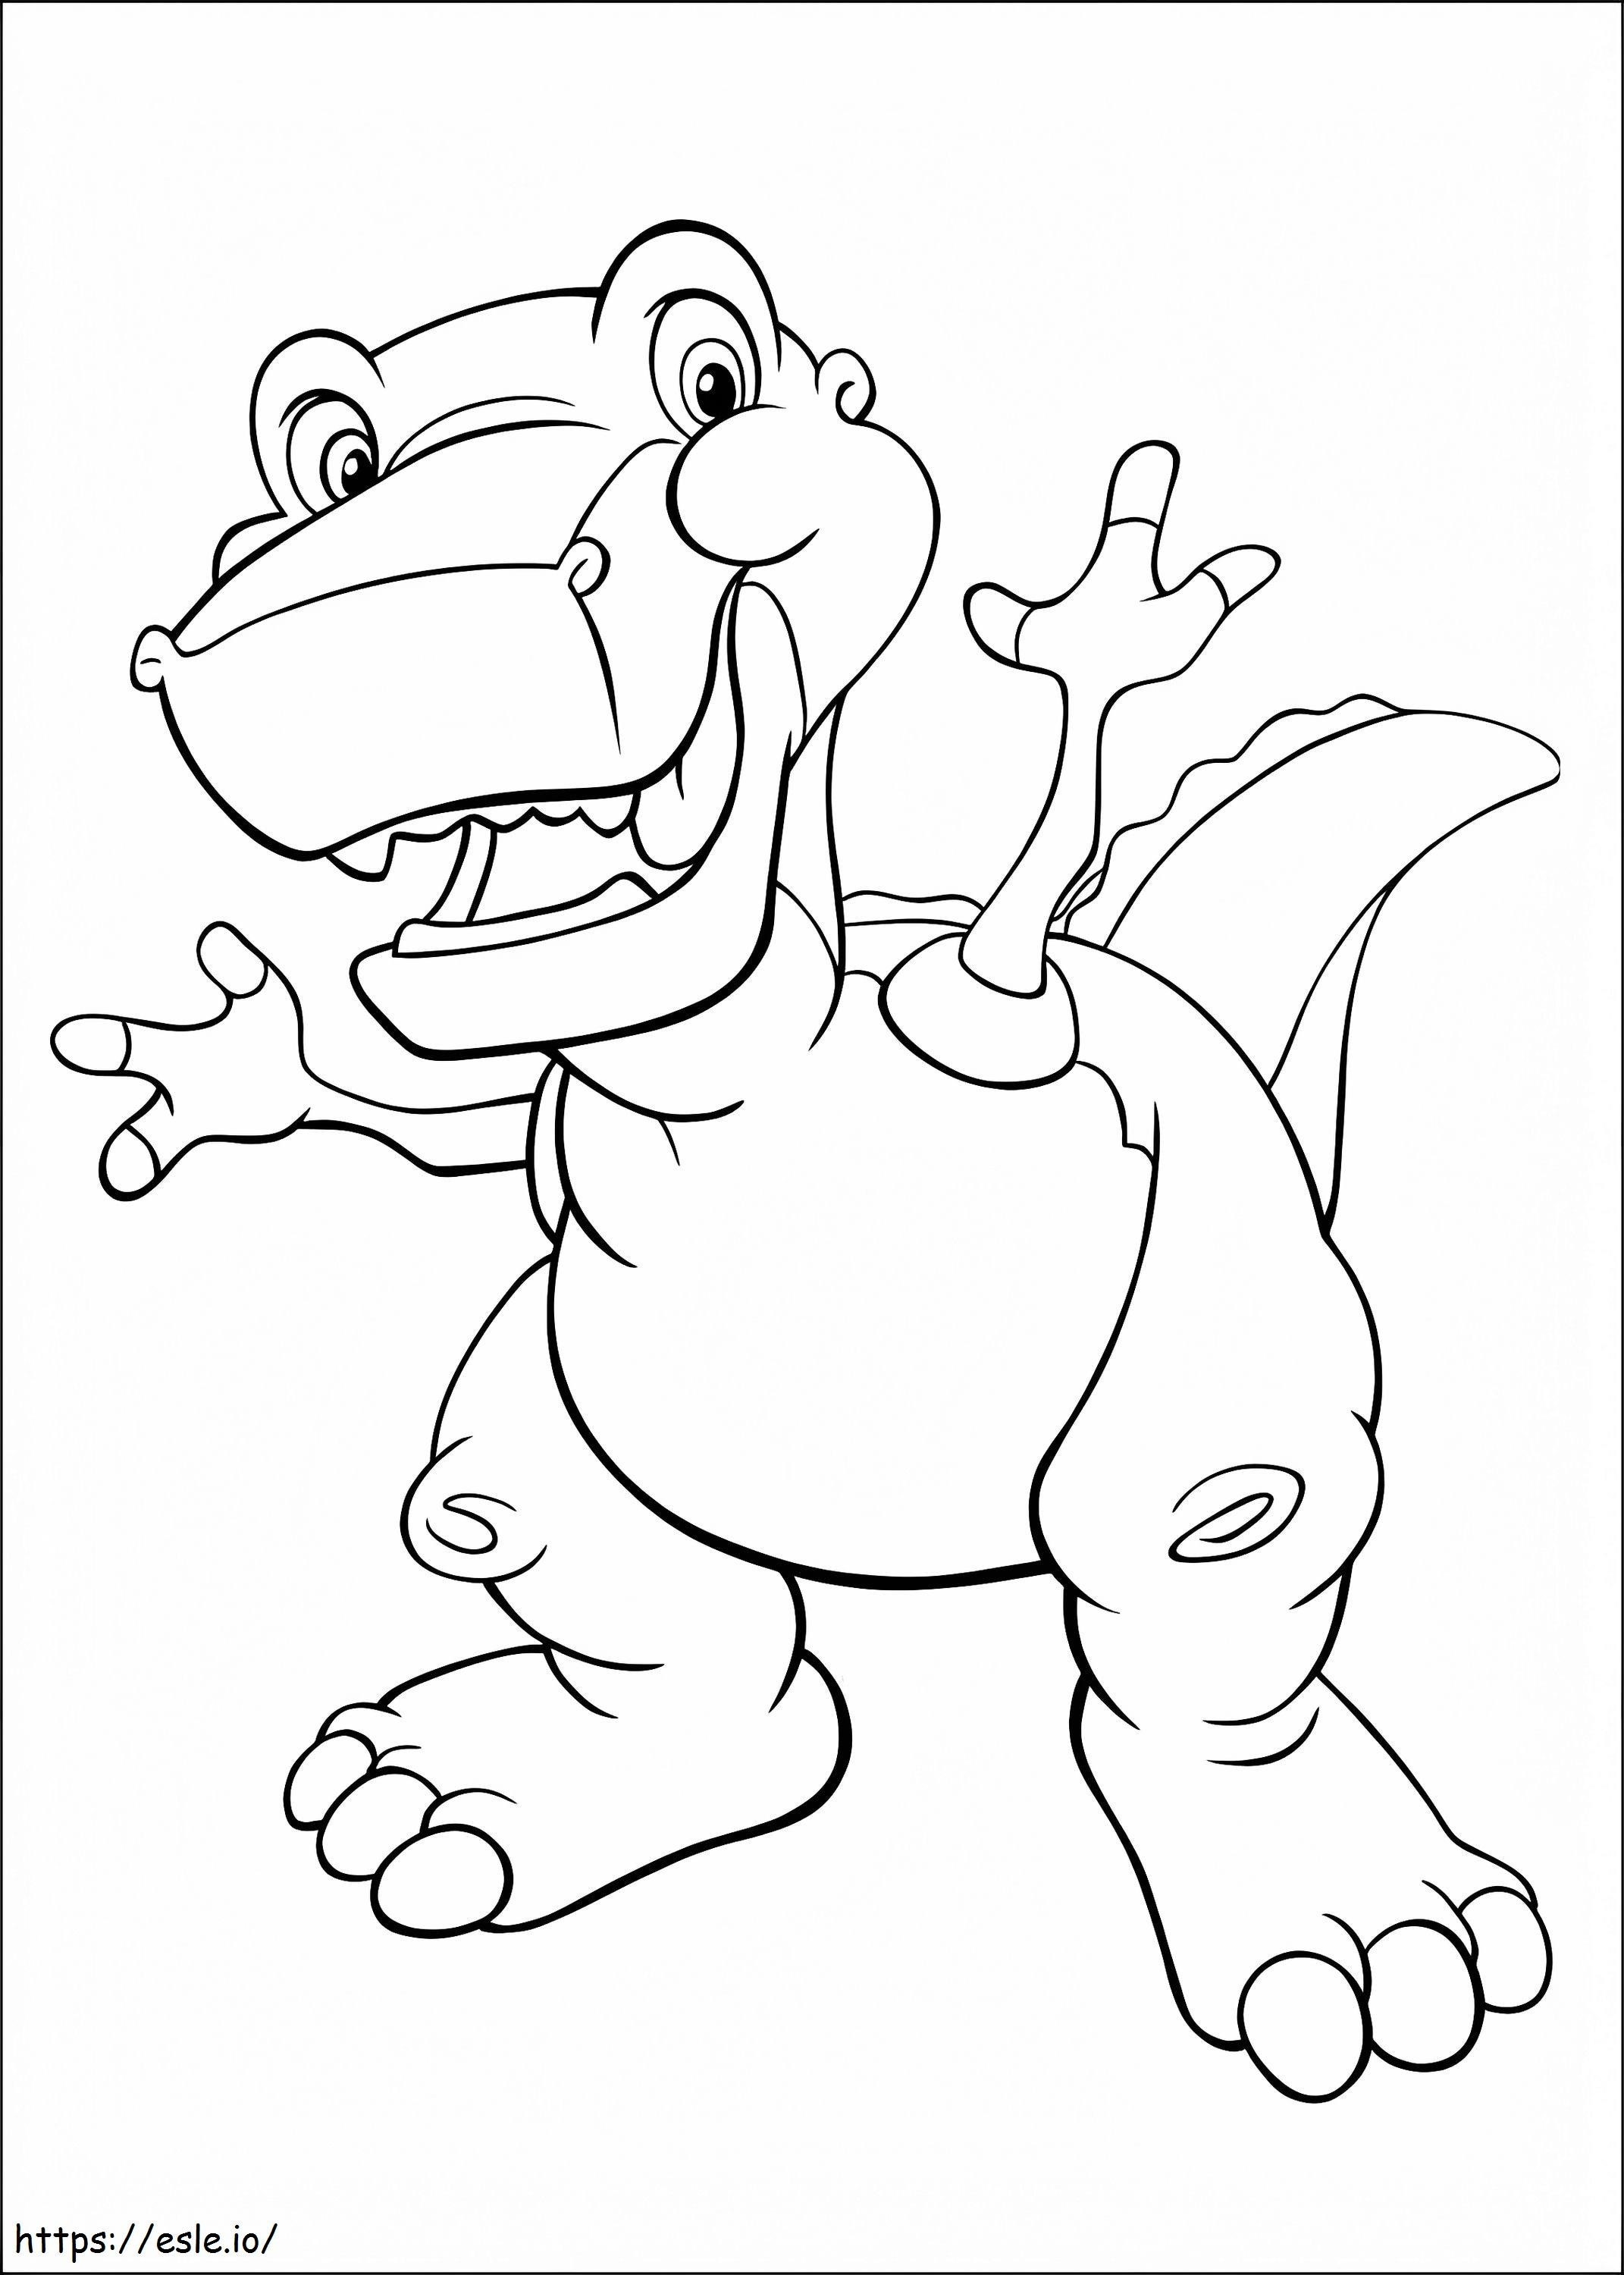 Chomper From Land Before Time coloring page